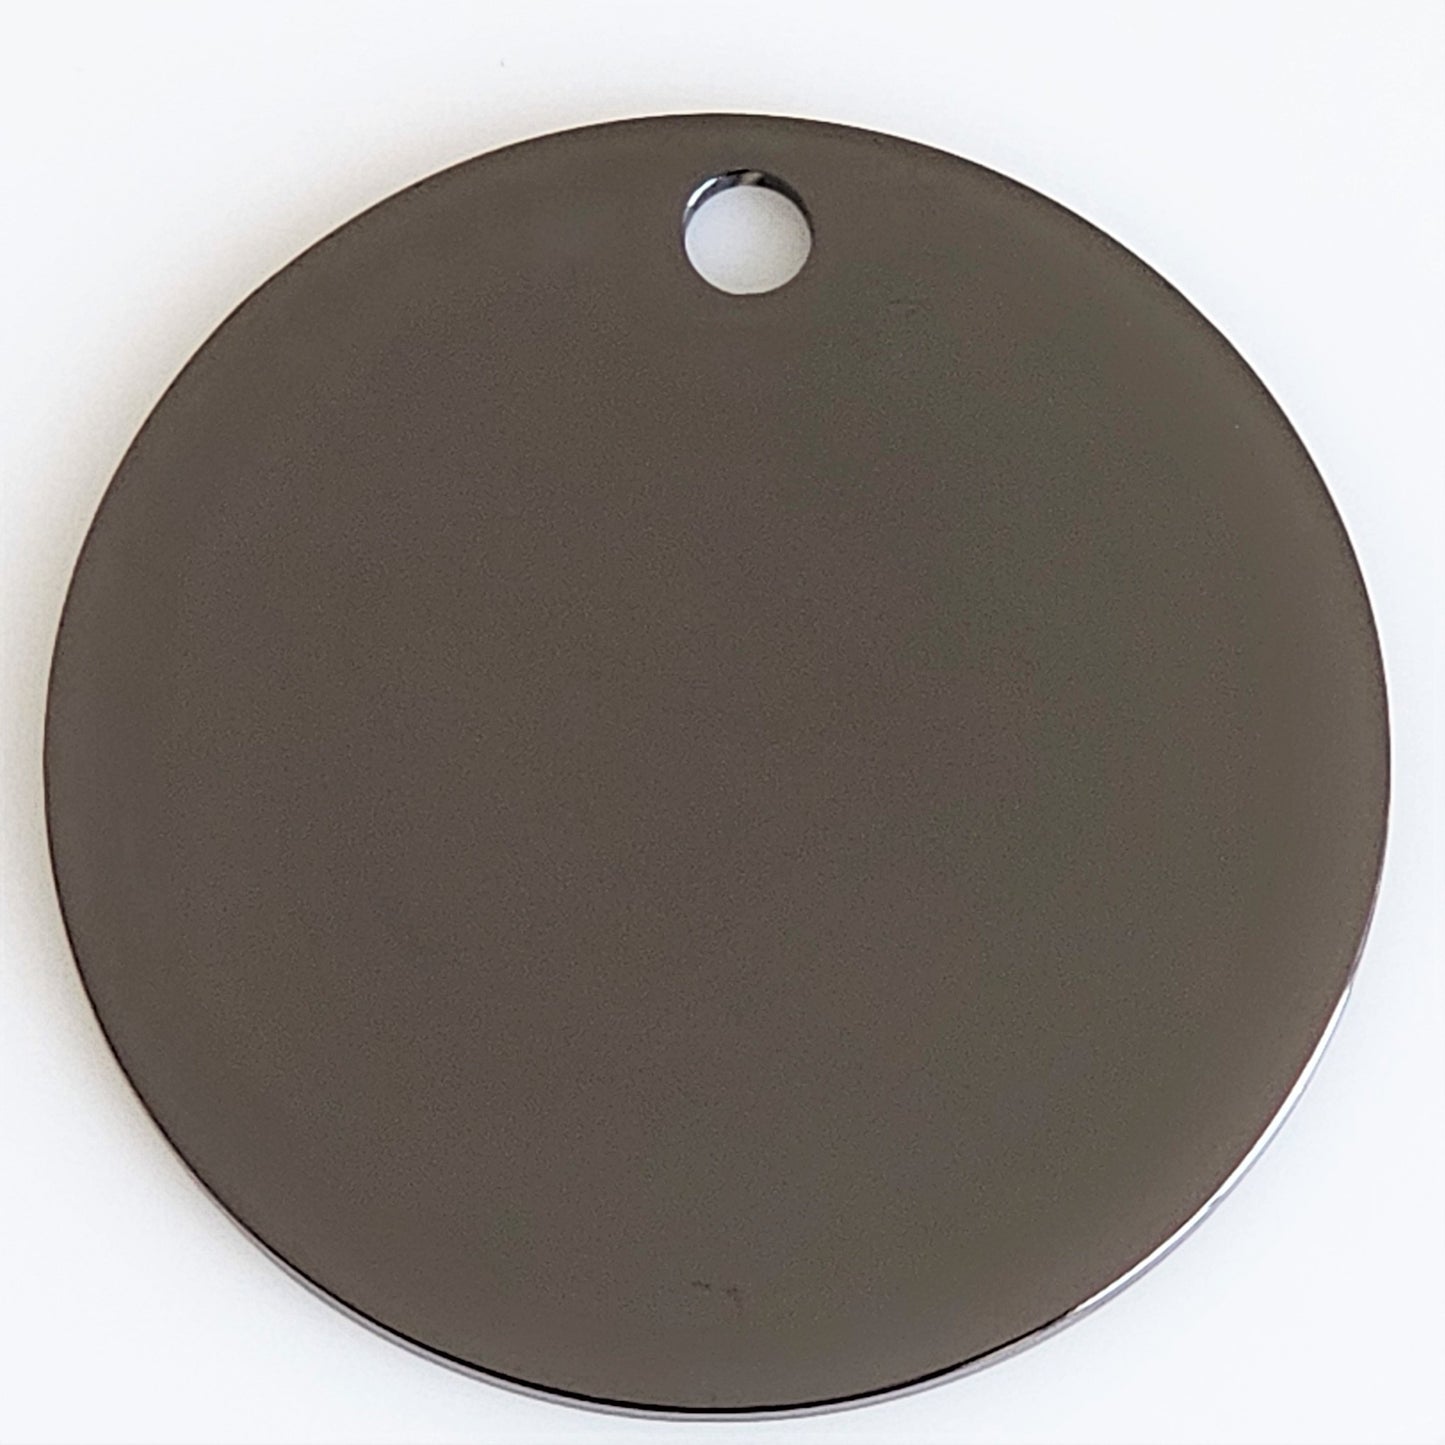 Black Plated Stainless Steel - 1 1/2" Circle (with hole)